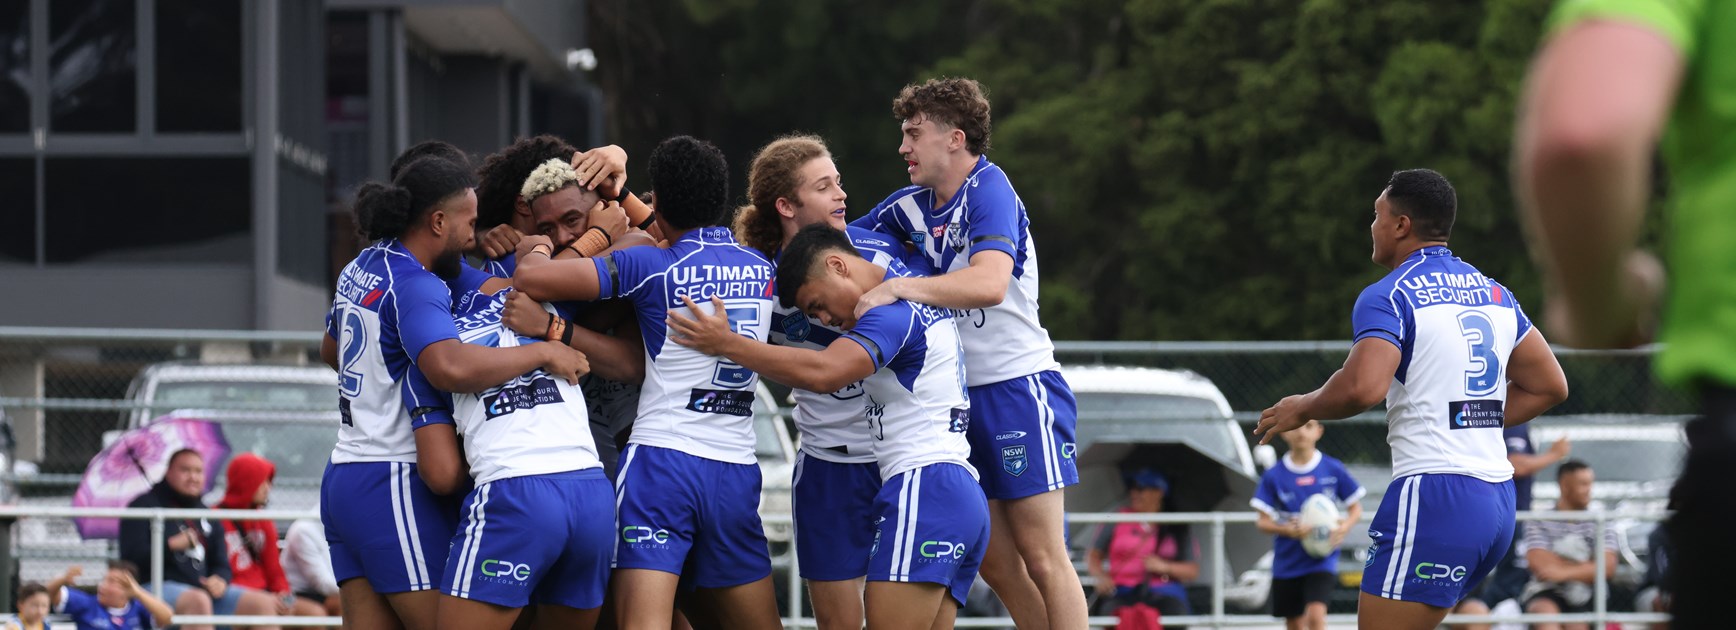 Junior Reps: SG Ball prevail over Eels, Tarsha Gale & Harold Matthews Cup fall in close encounters